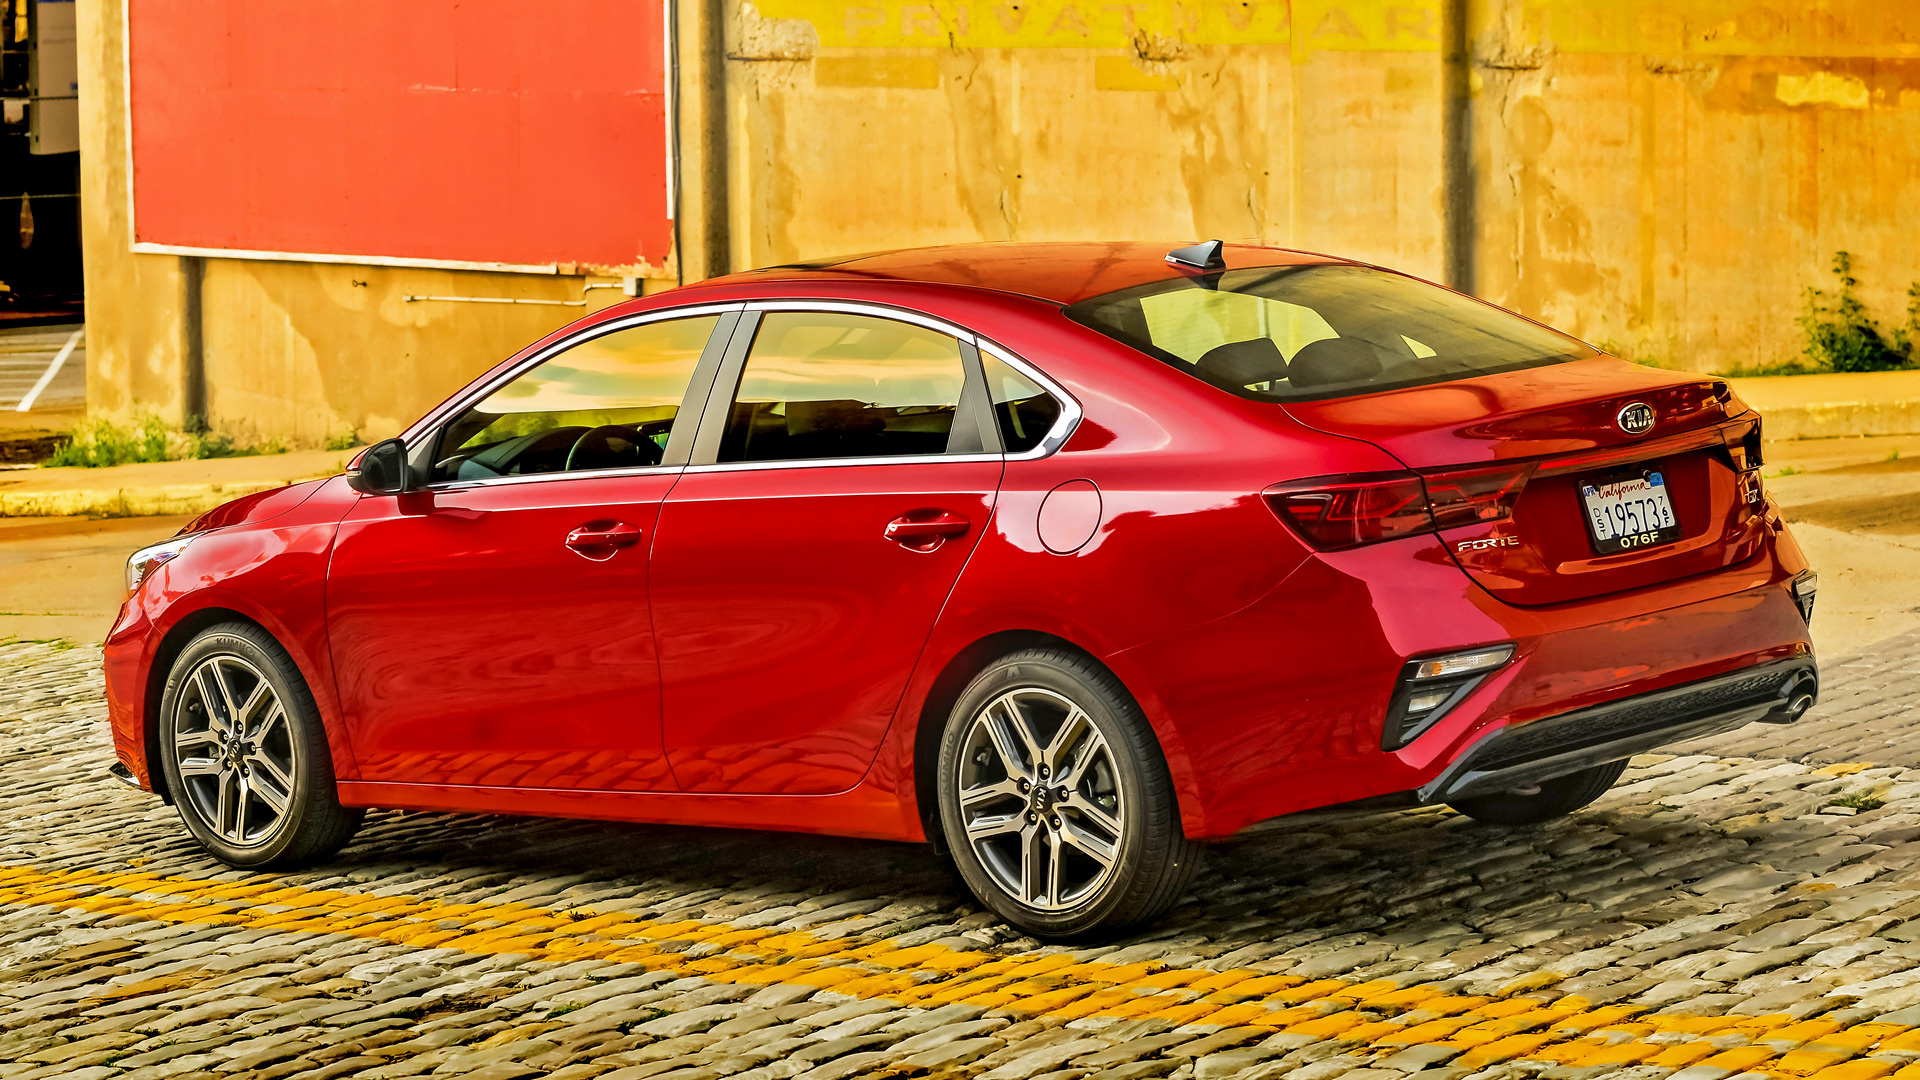 2019 Kia Forte - Wallpapers and HD Images | Car Pixel